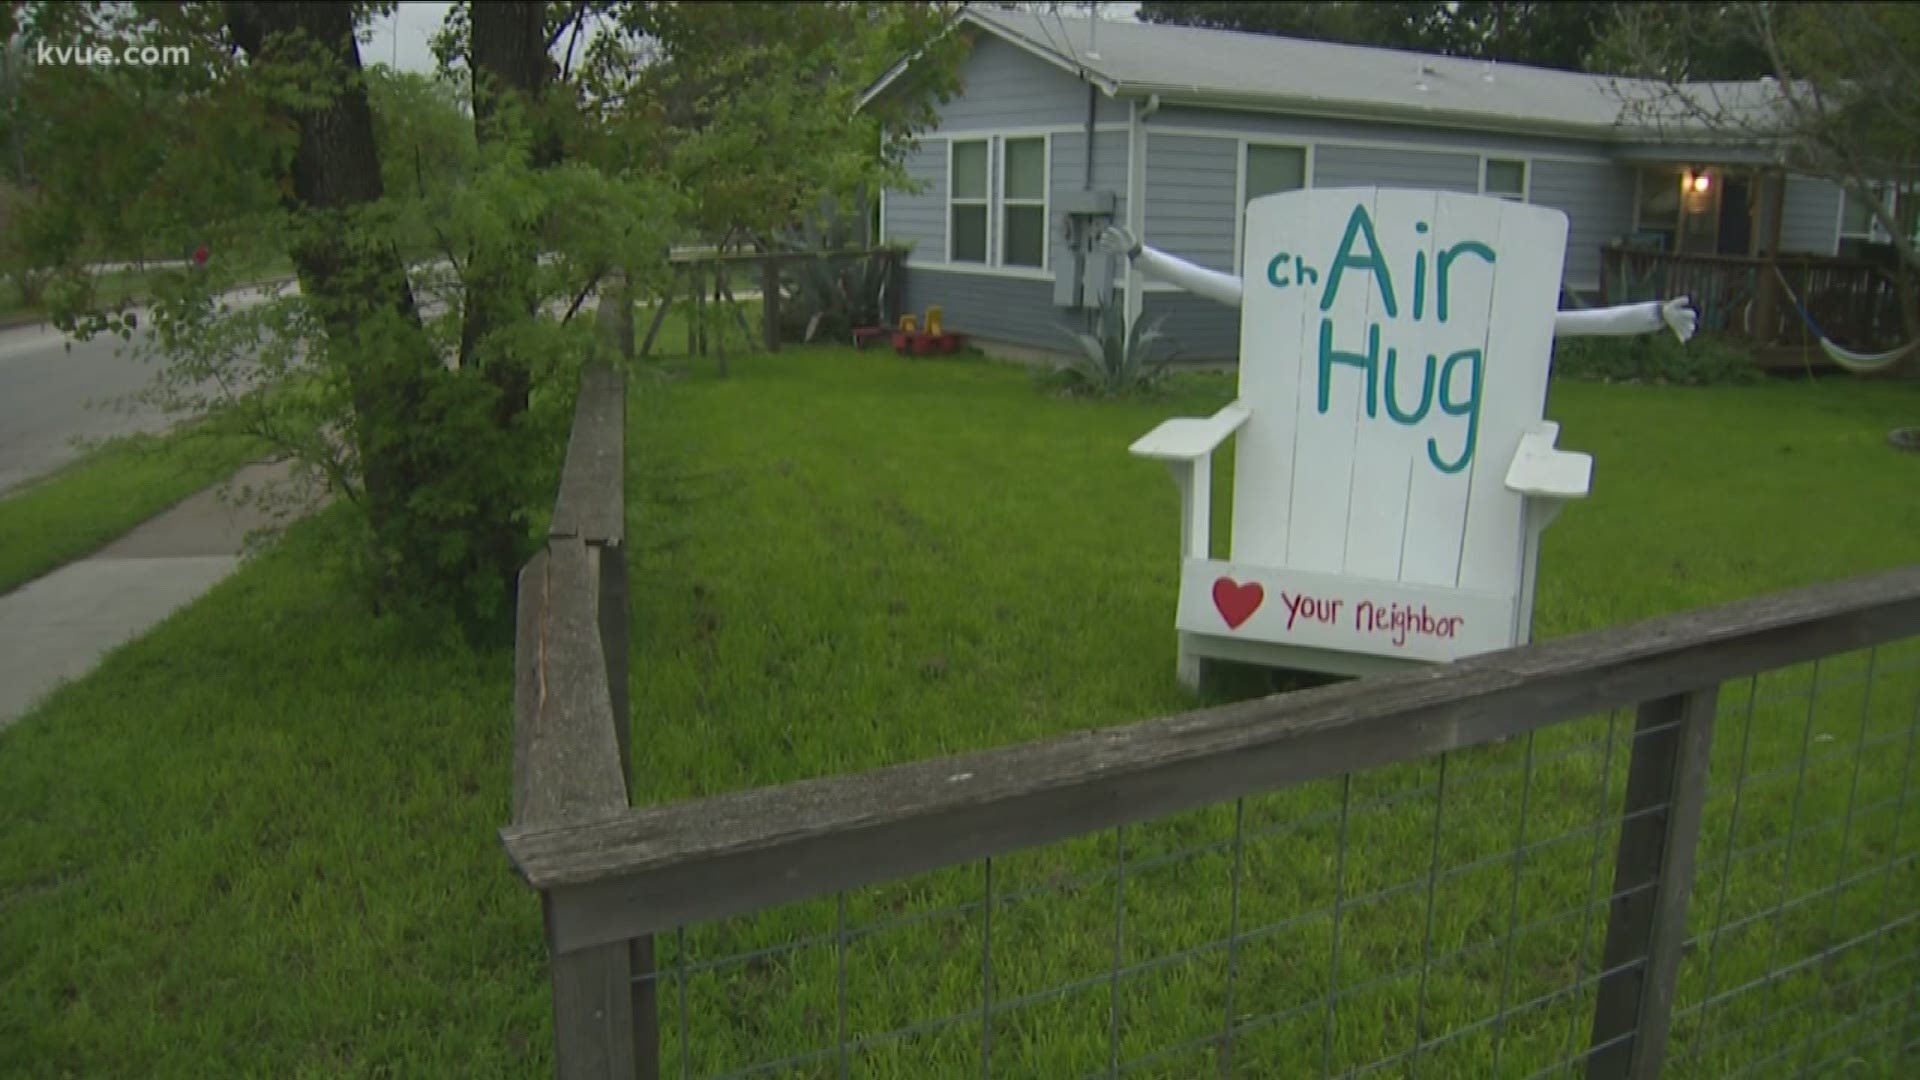 Communities are finding ways to send positive messages during this tough time.